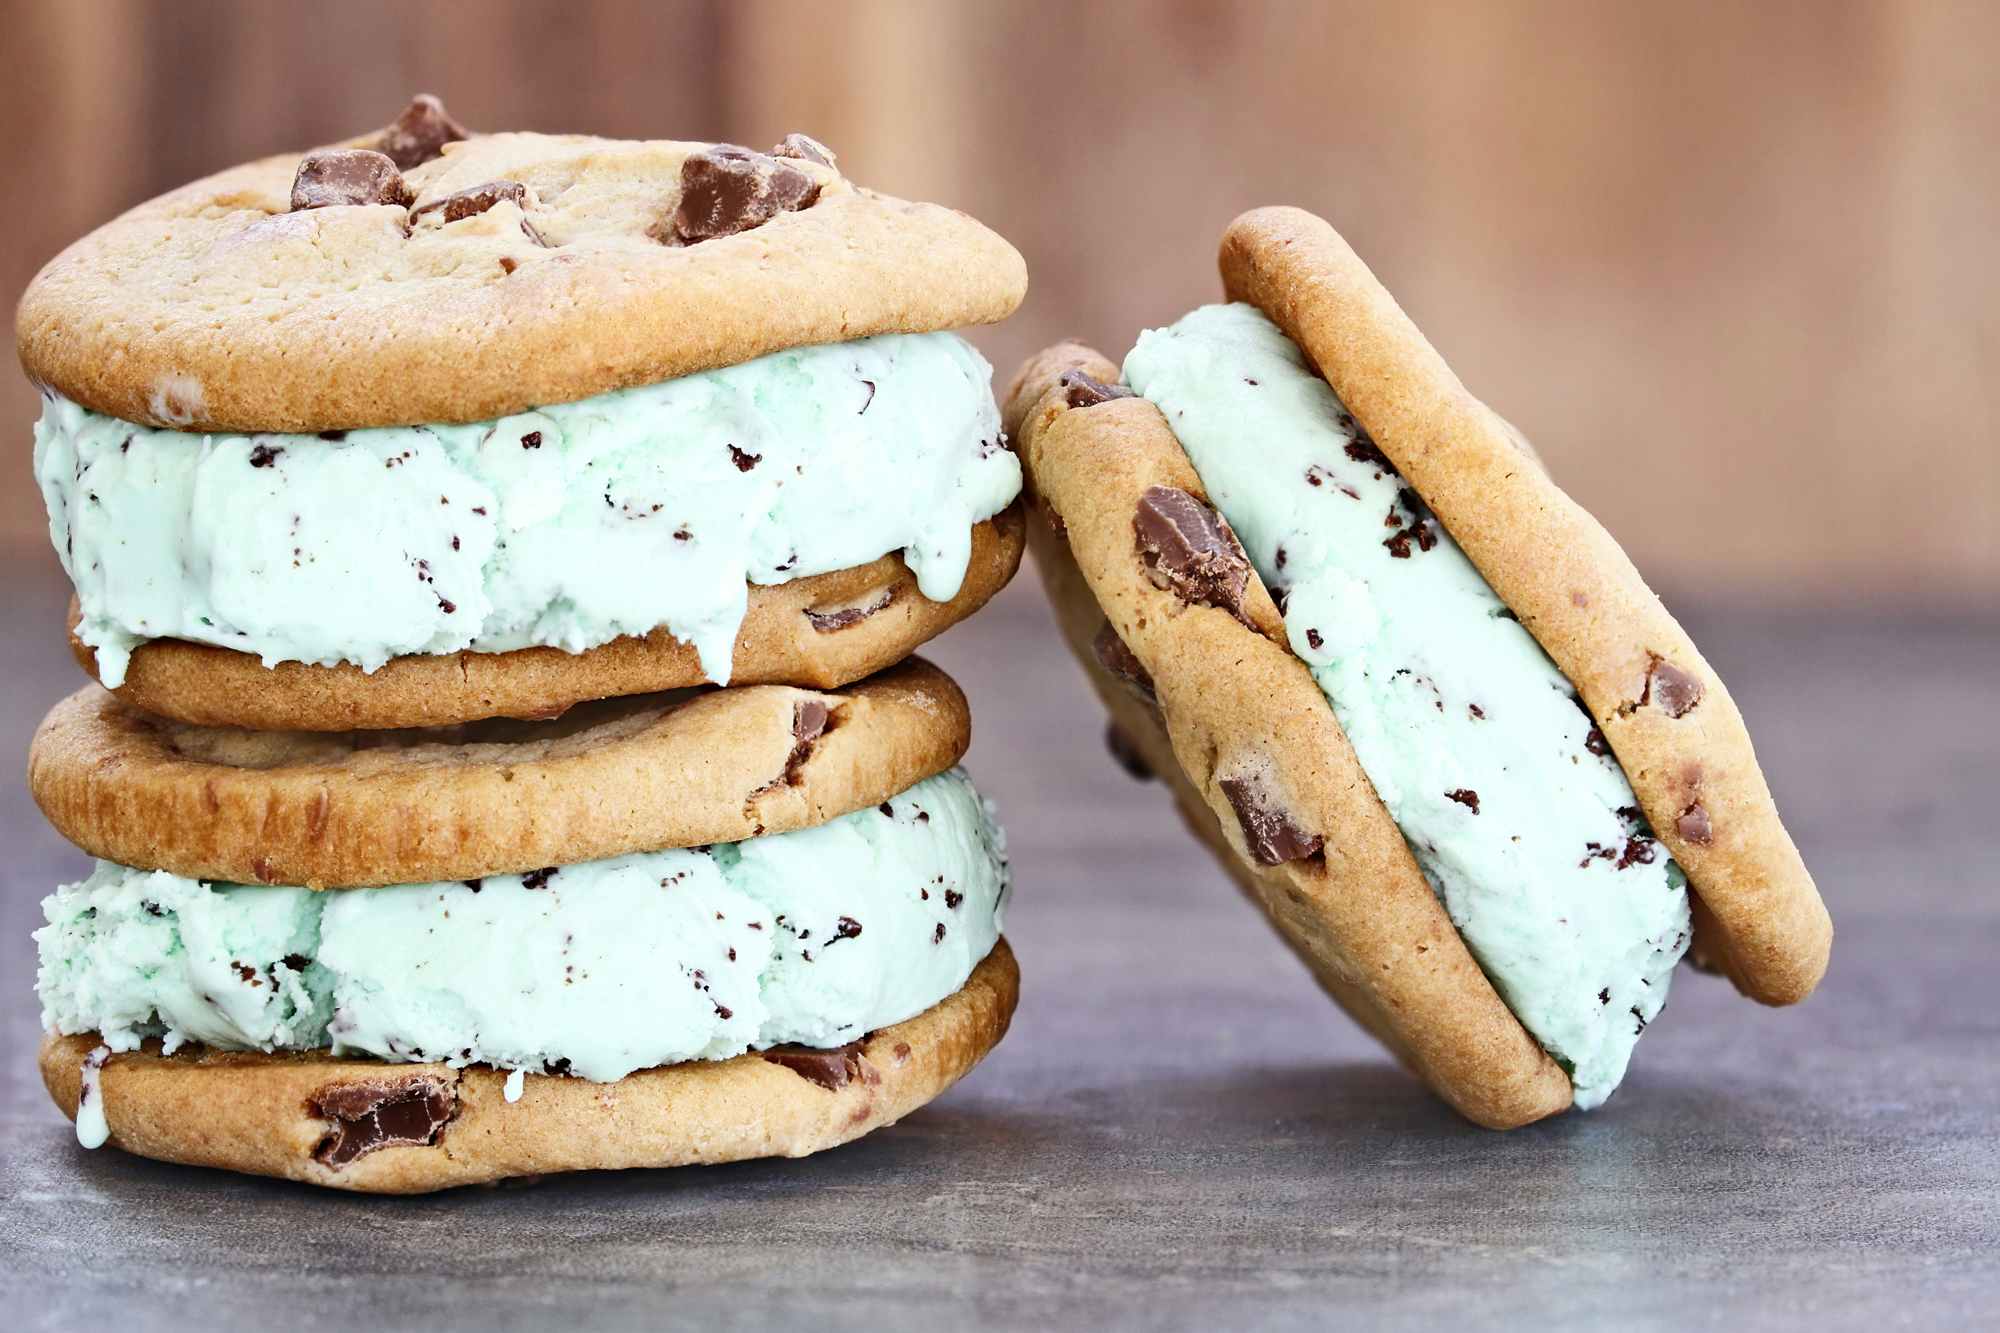 Some mint chocolate chip ice cream sandwiches